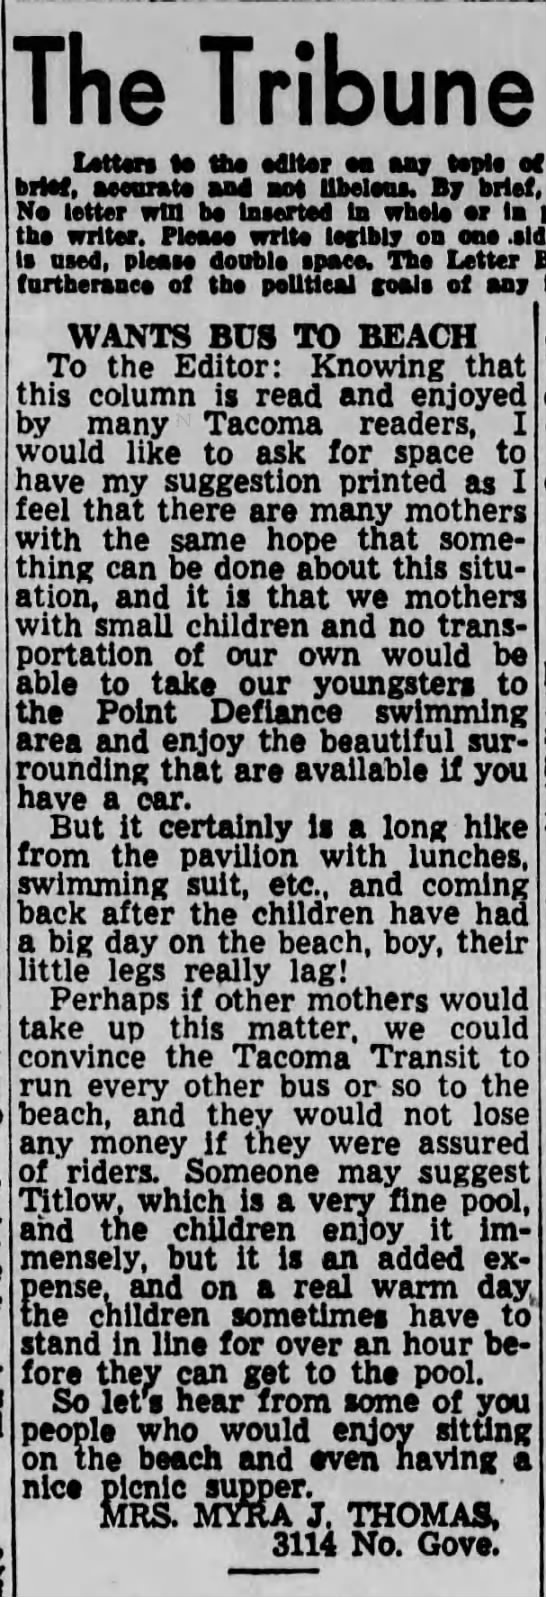 1956 letter to the editor - 